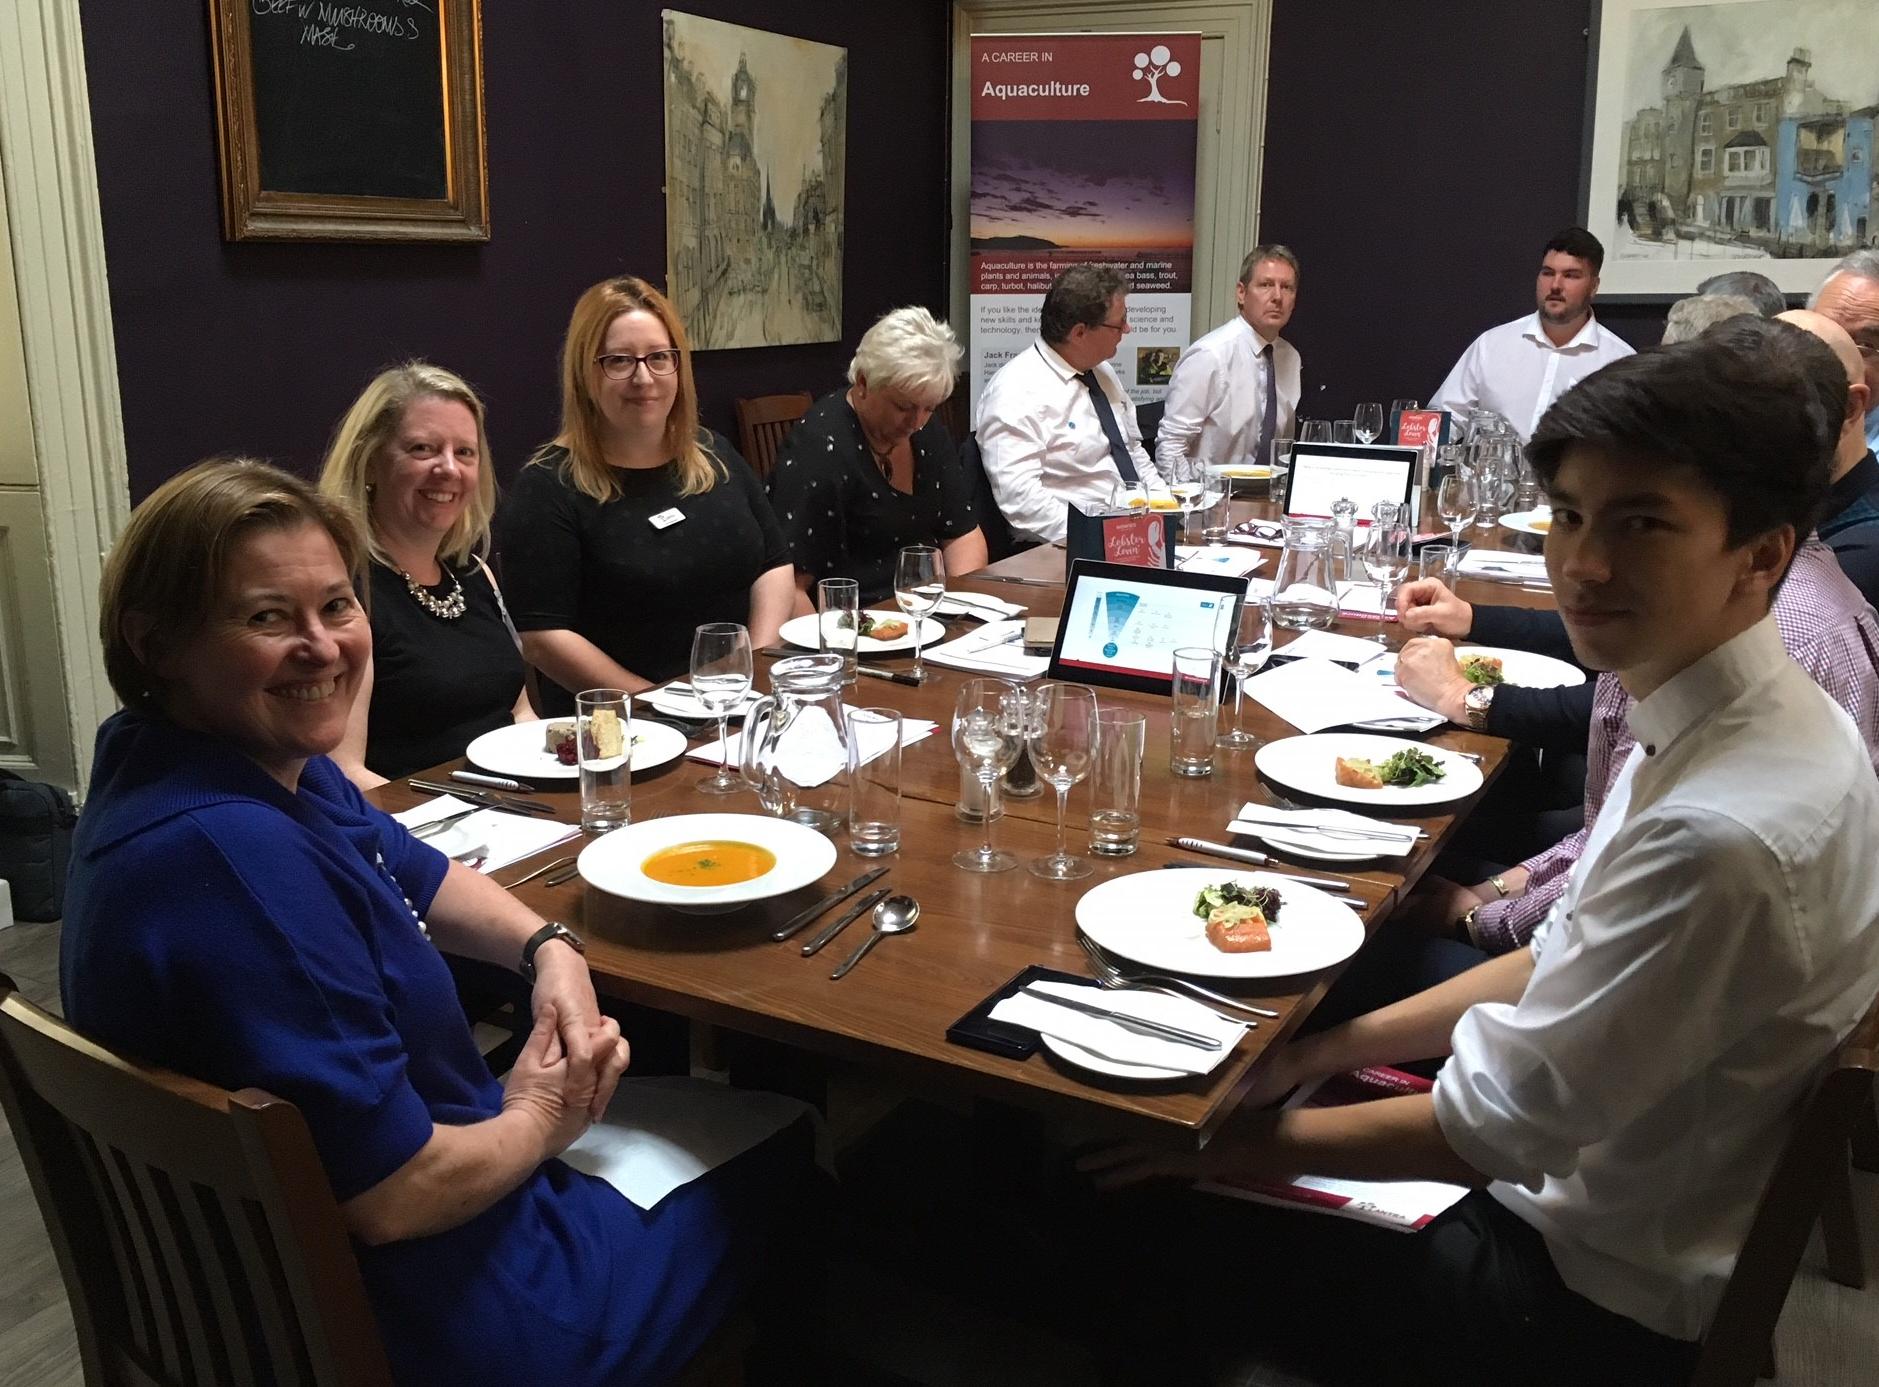 Aquaculture lunch with Lantra Scotland Chairman and industry figures